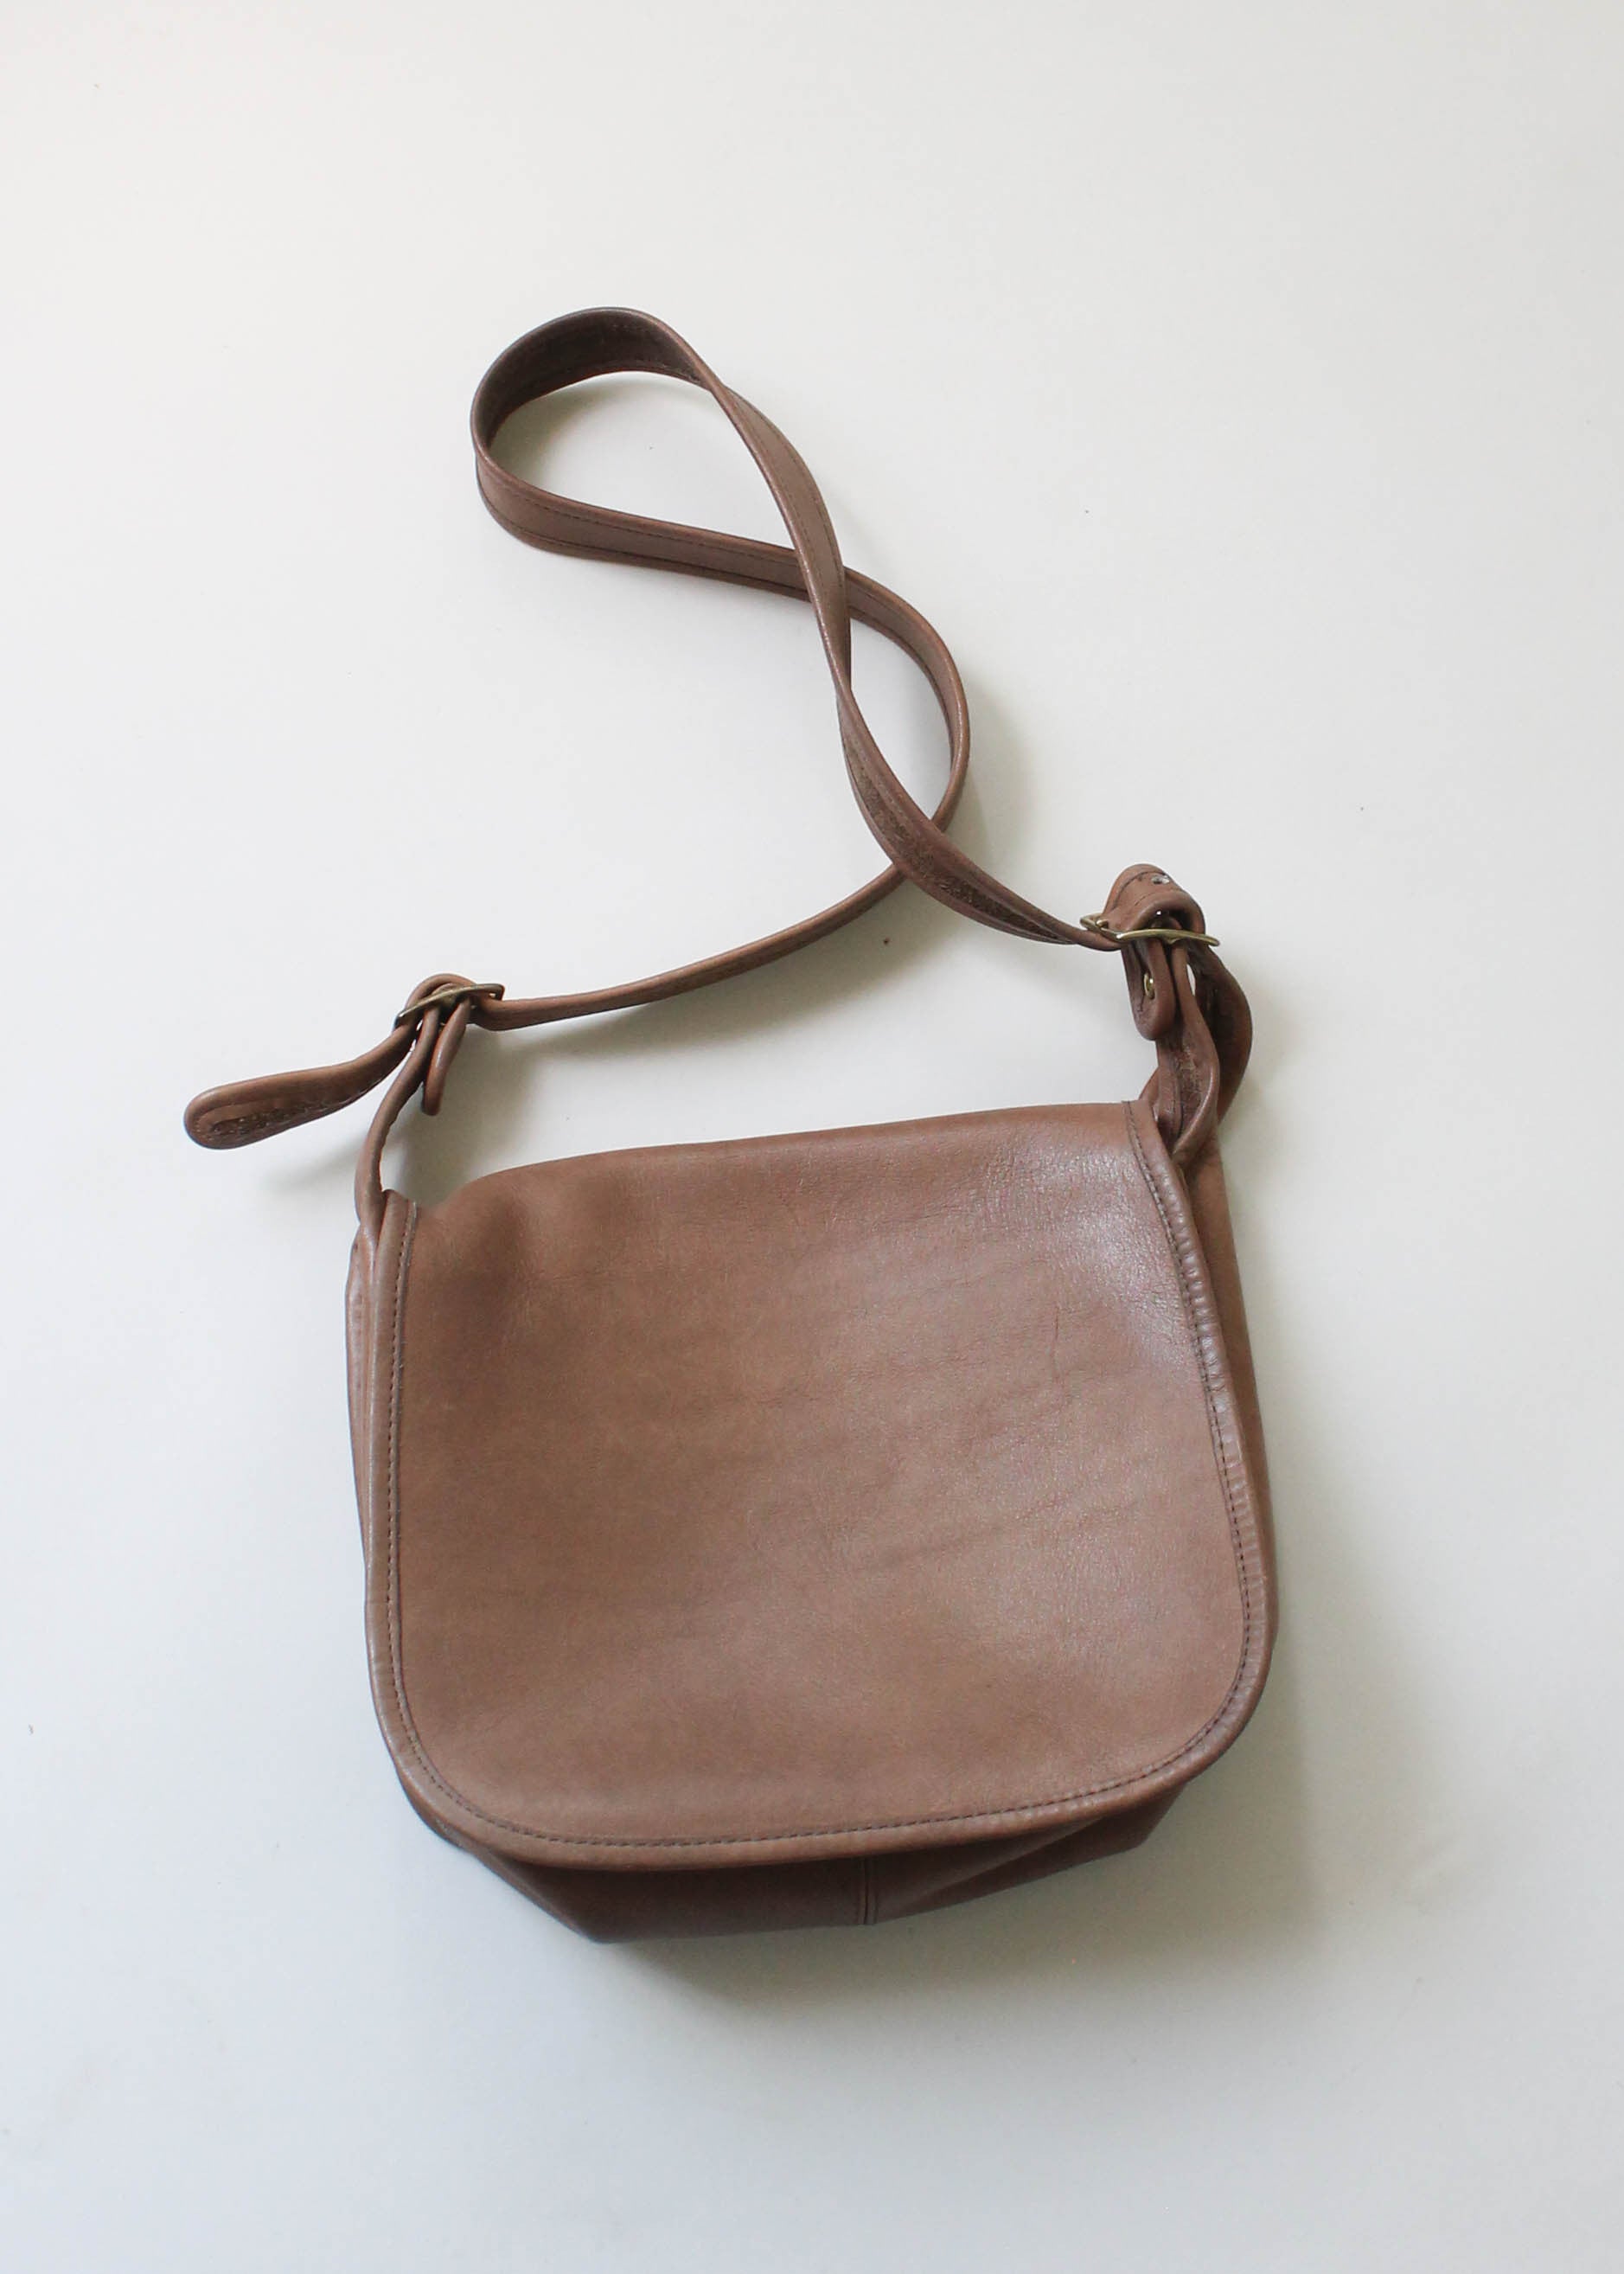 Vintage 1970s Coach Taupe Leather Saddle Bag Purse - Raleigh Vintage